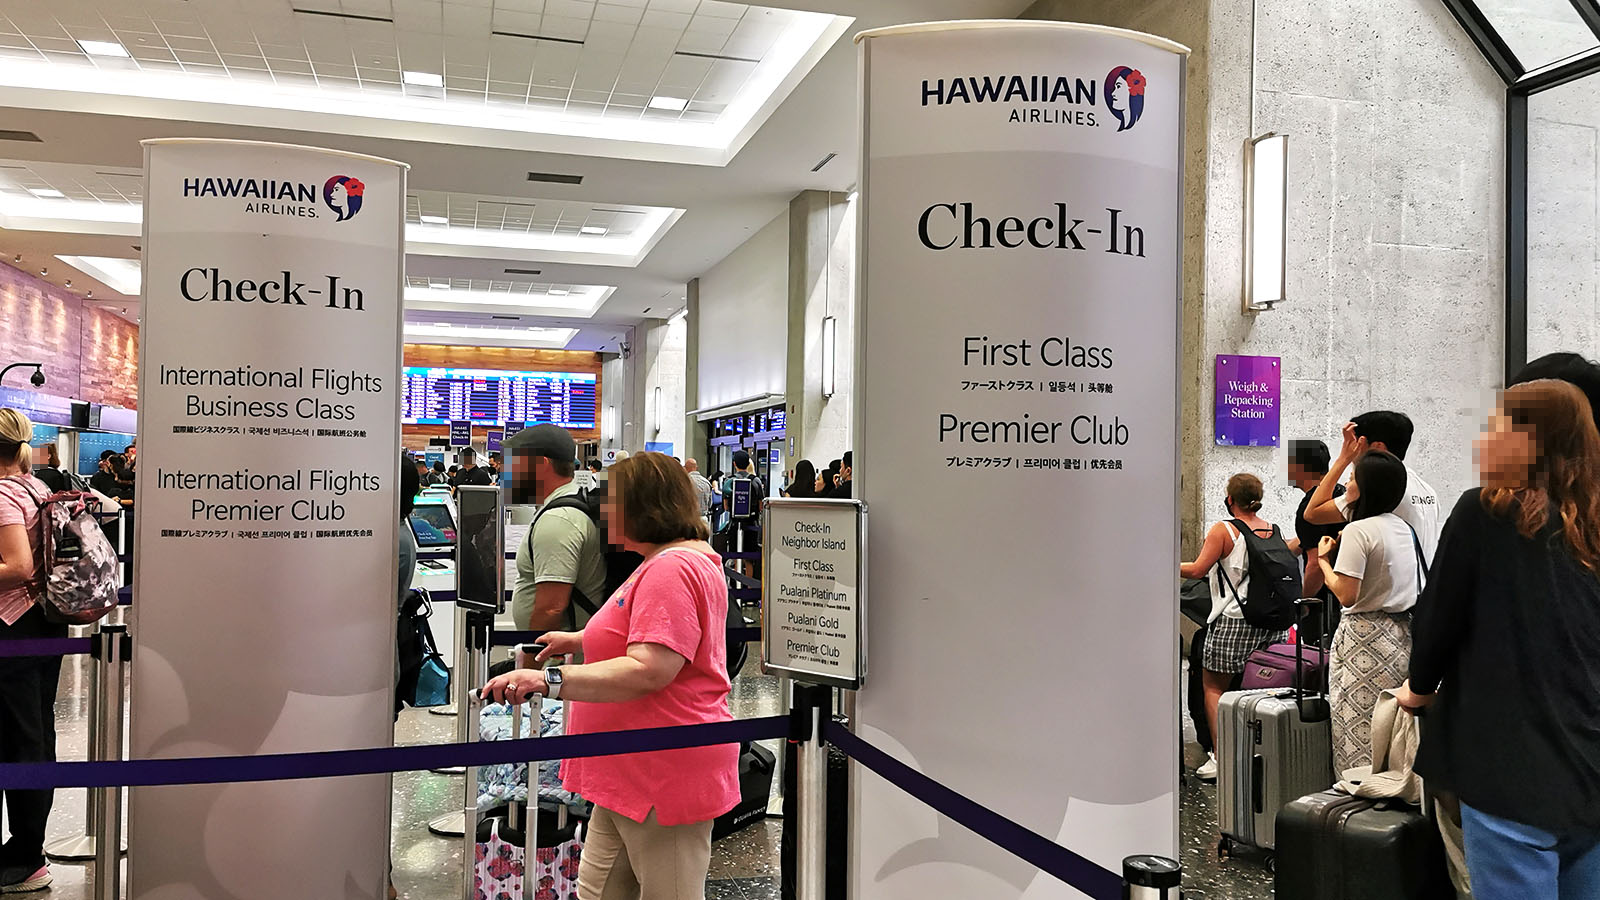 Queue for First Class check-in at Honolulu Airport